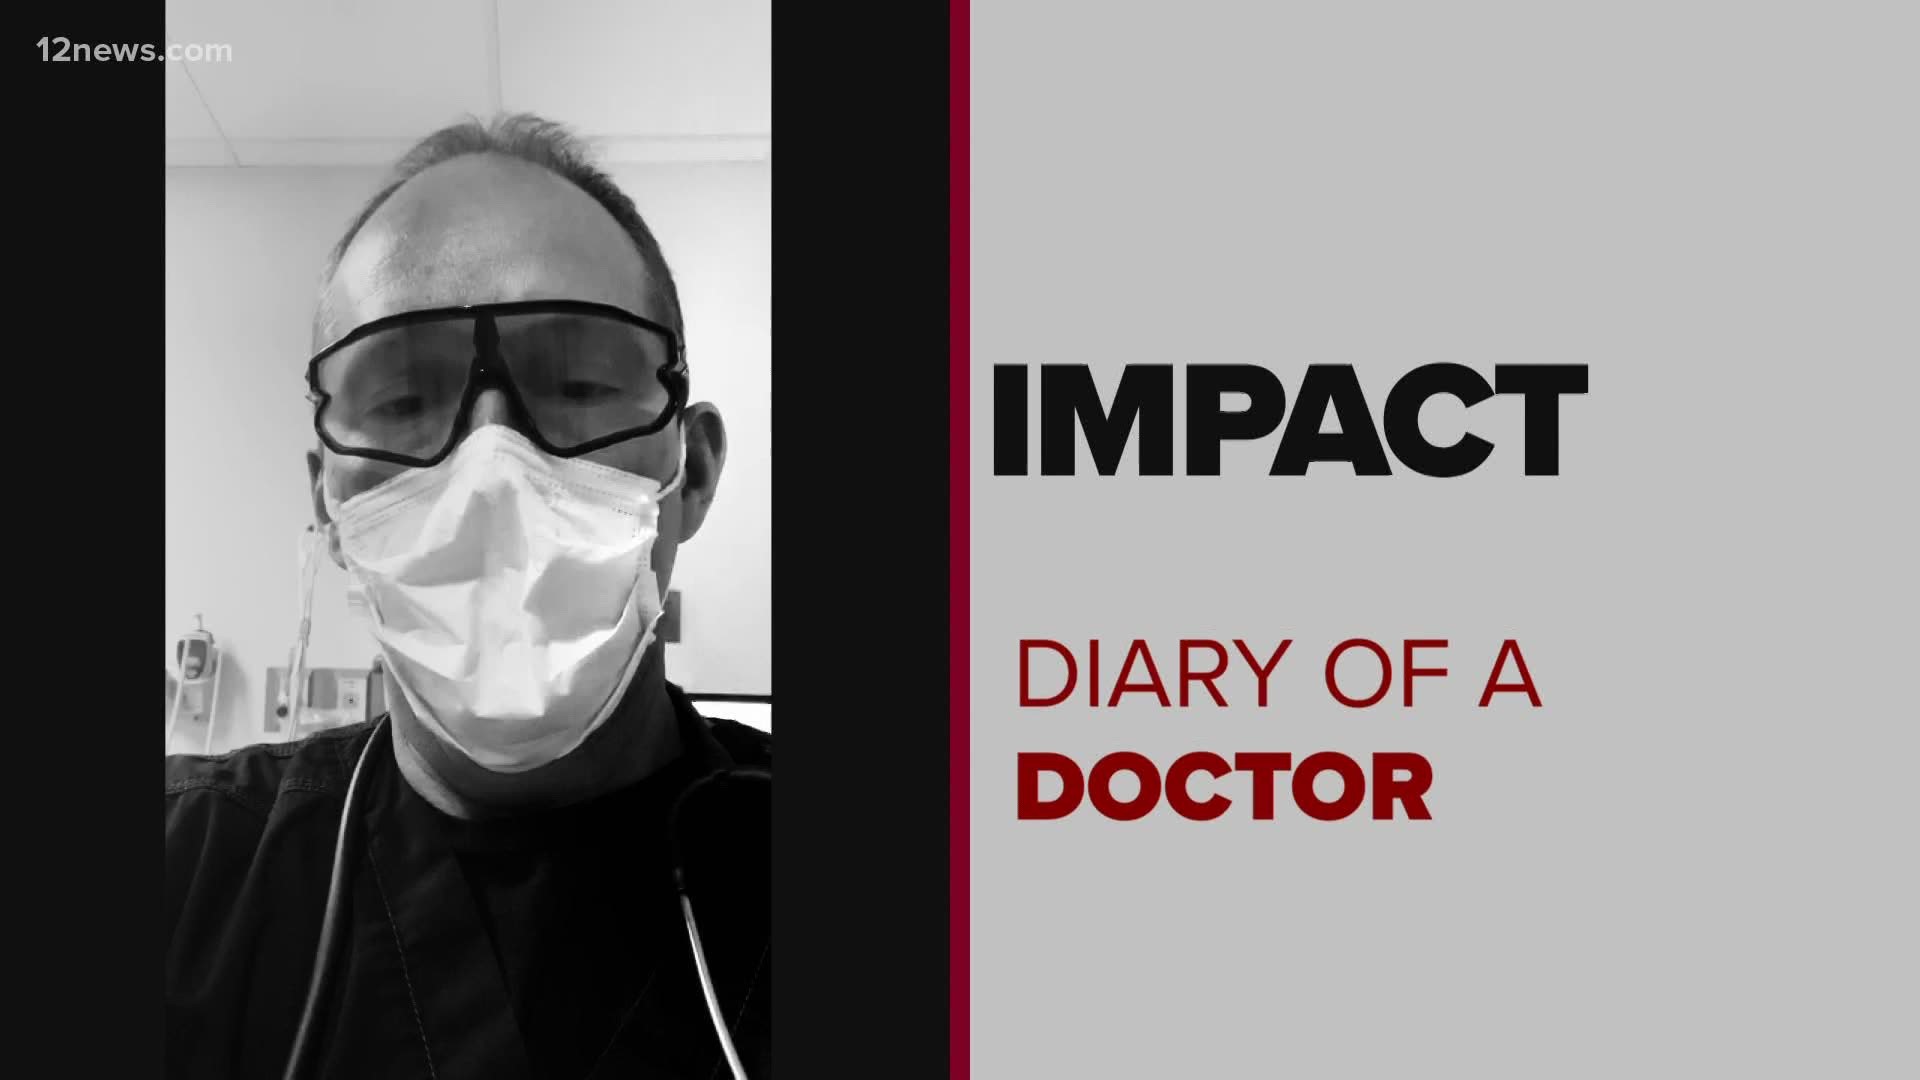 Dr. Brad Harrison shares what his day to day is like during the COVID-19 pandemic.